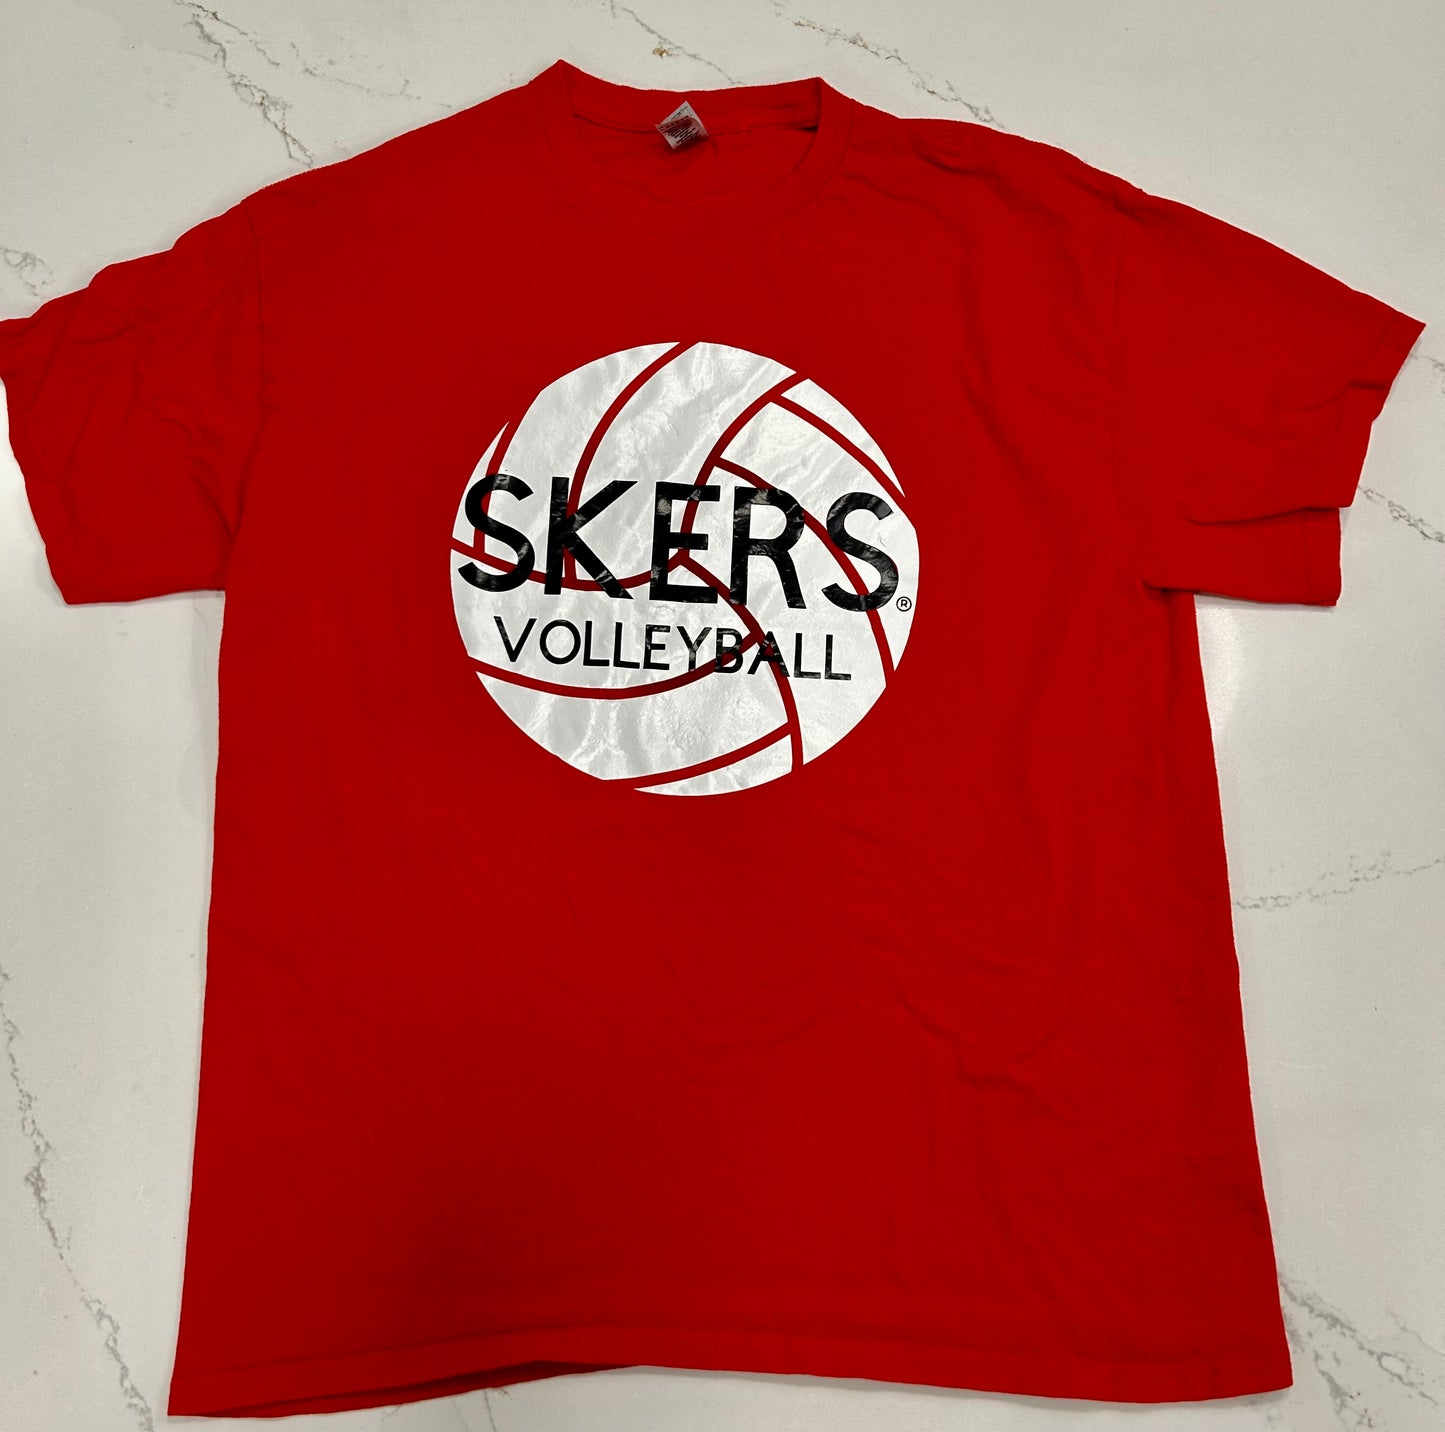 Skers Volleyball Black Lettering Red Unisex - Short Sleeve Shirt